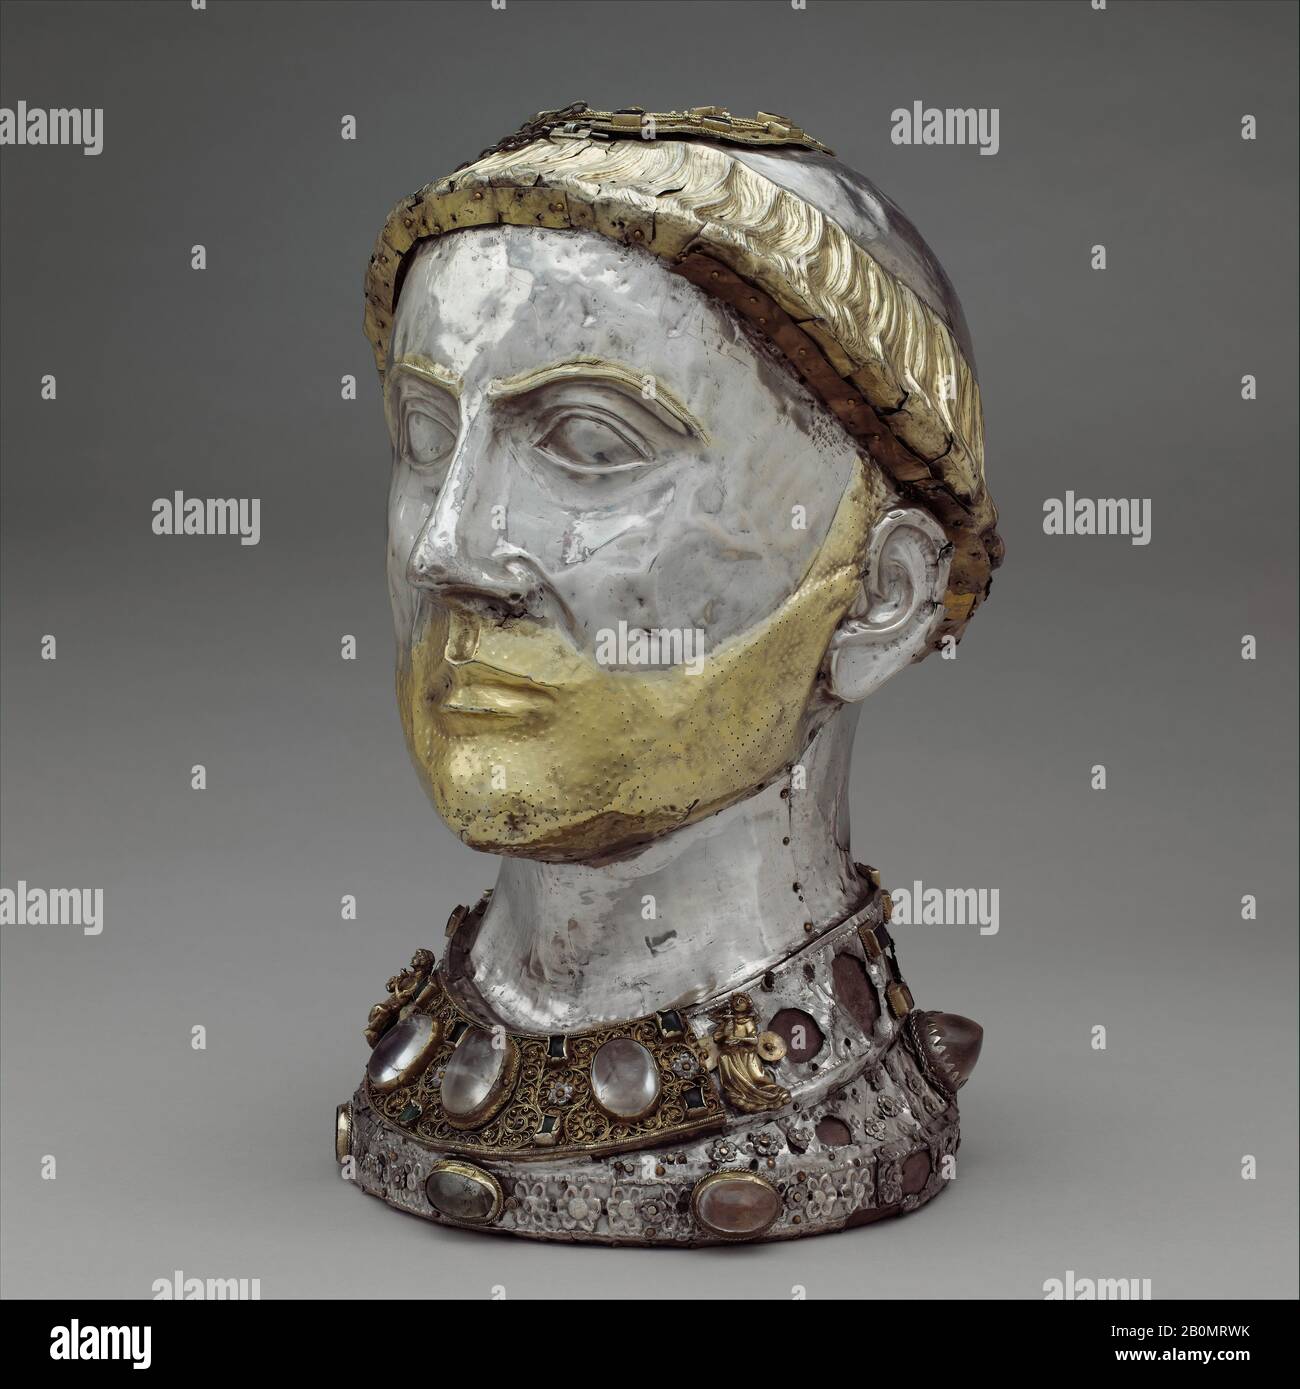 Reliquary Bust of Saint Yrieix, French, ca. 1220–40, with later grill, Made in Limoges, France, French, Silver and gilded silver with rock crystal, gems, and glass, Overall (Reliquary): 15 x 9 3/16 x 10 1/4 in. (38.1 x 23.4 x 26.1 cm), Other (Wooden core): 14 7/16 x 8 7/8 x 9 13/16 in. (36.6 x 22.5 x 24.9 cm), Metalwork-Silver Stock Photo